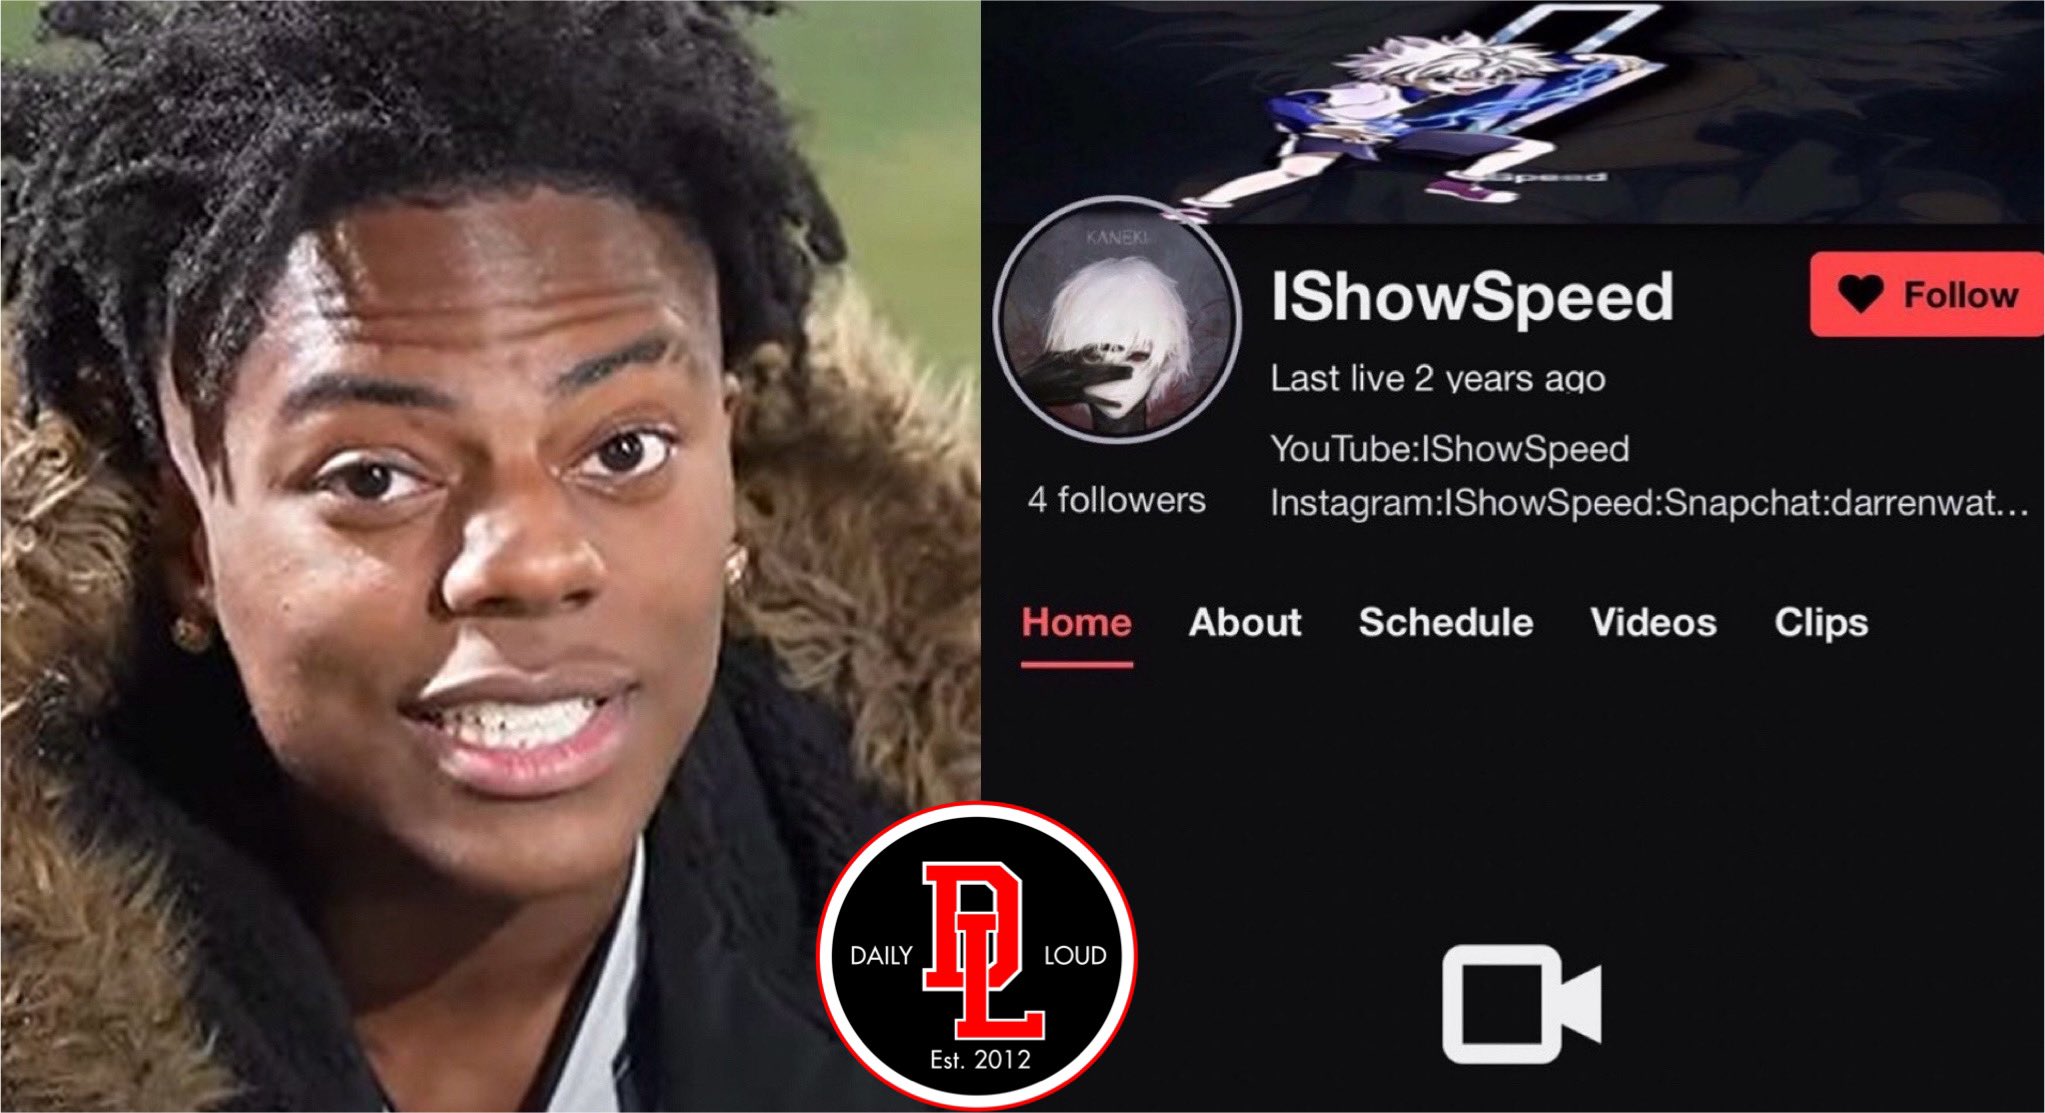 Speed is finally unbanned on Twitch after 2 years! #ishowspeed #speed